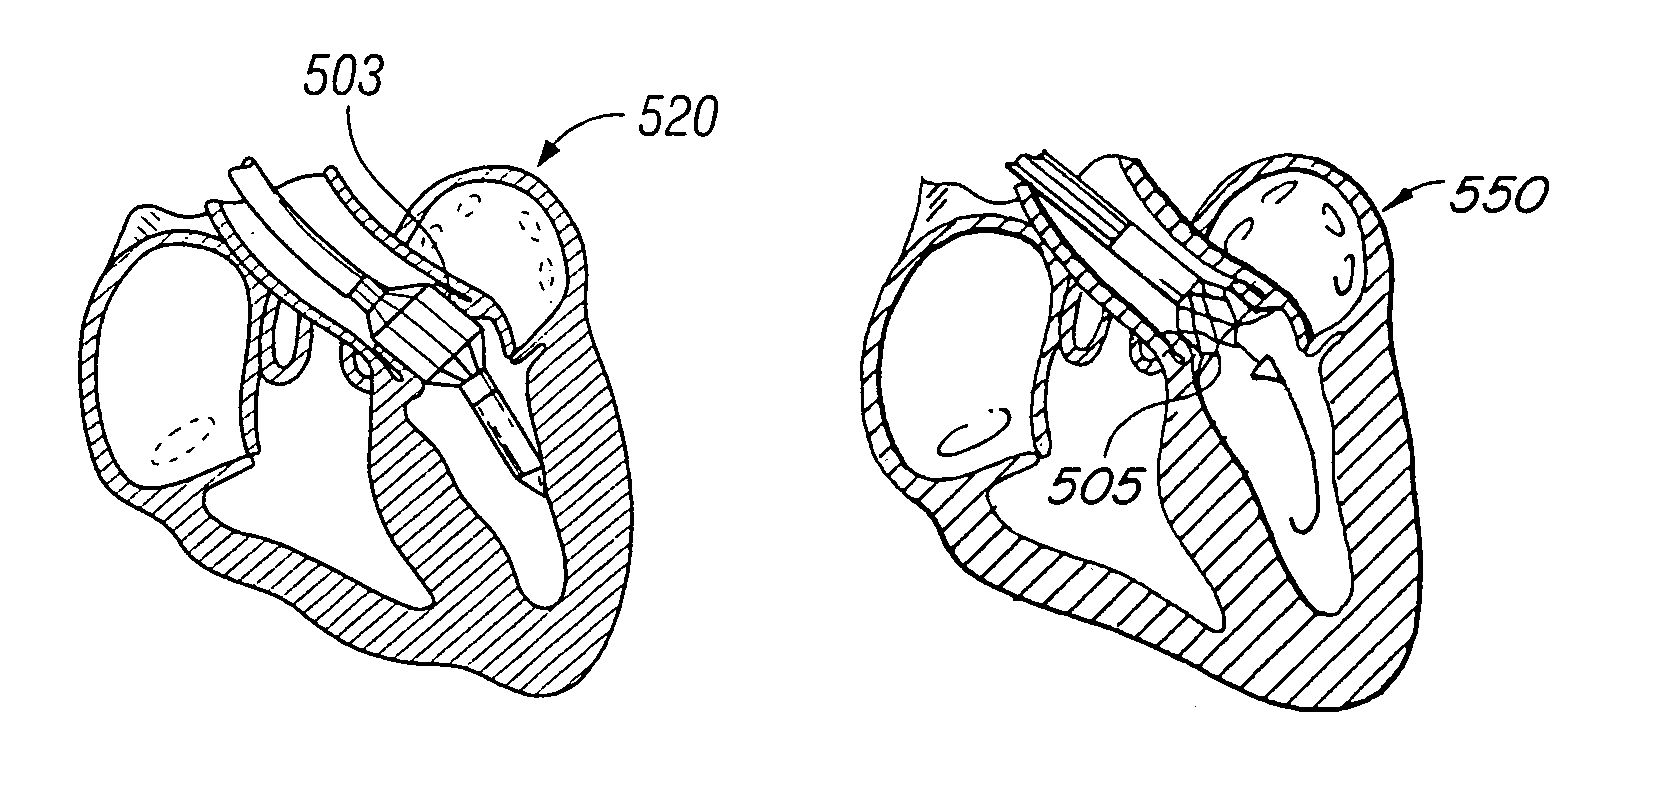 Endoluminal cardiac and venous valve prostheses and methods of manufacture and delivery thereof